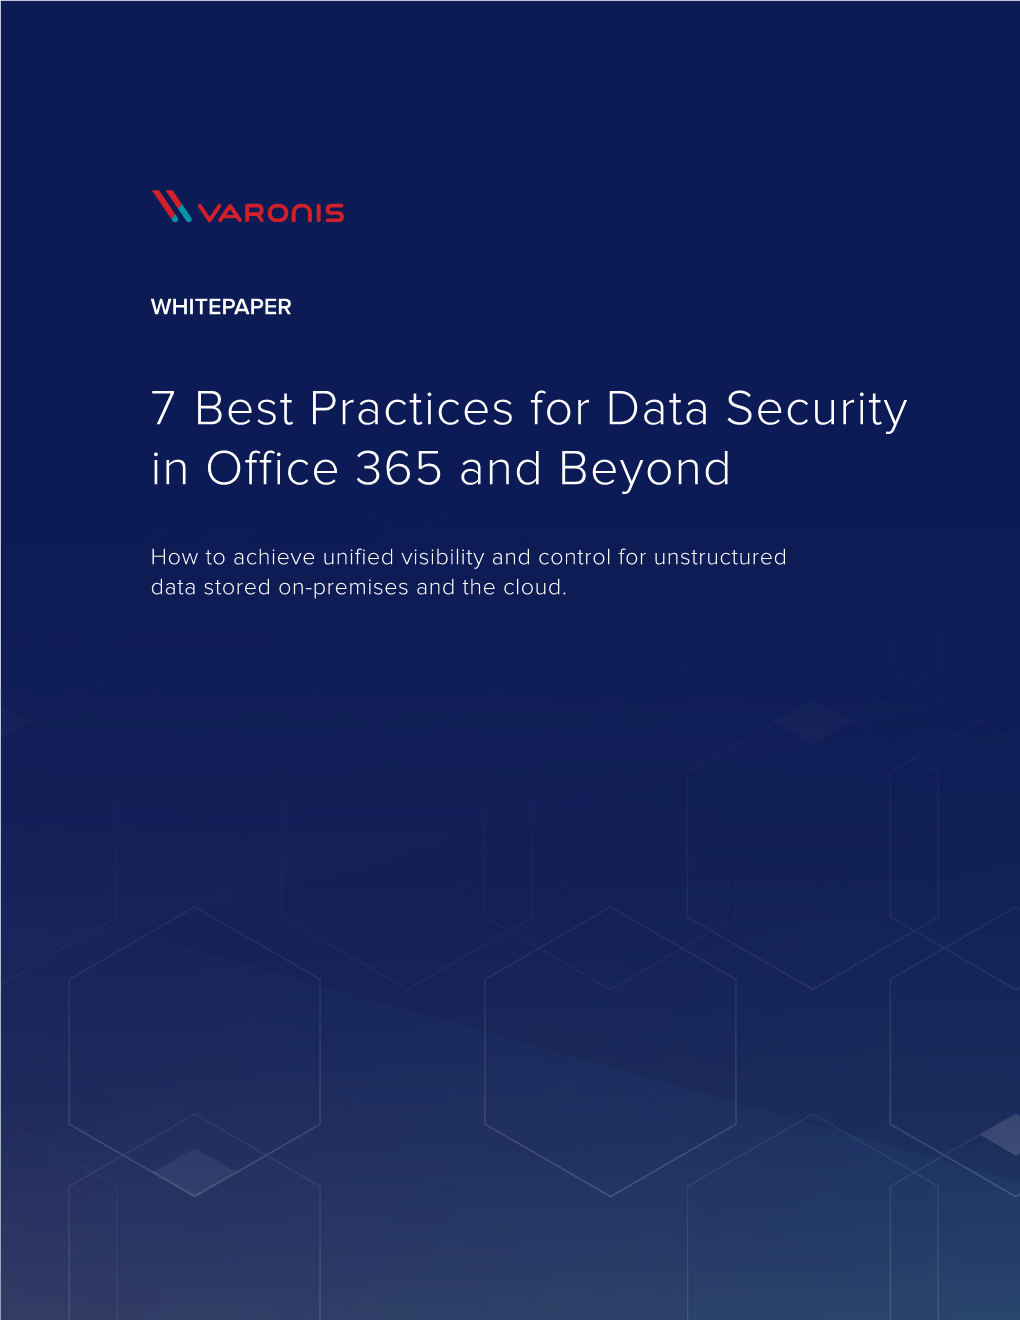 7 Best Practices for Data Security in Office 365 and Beyond